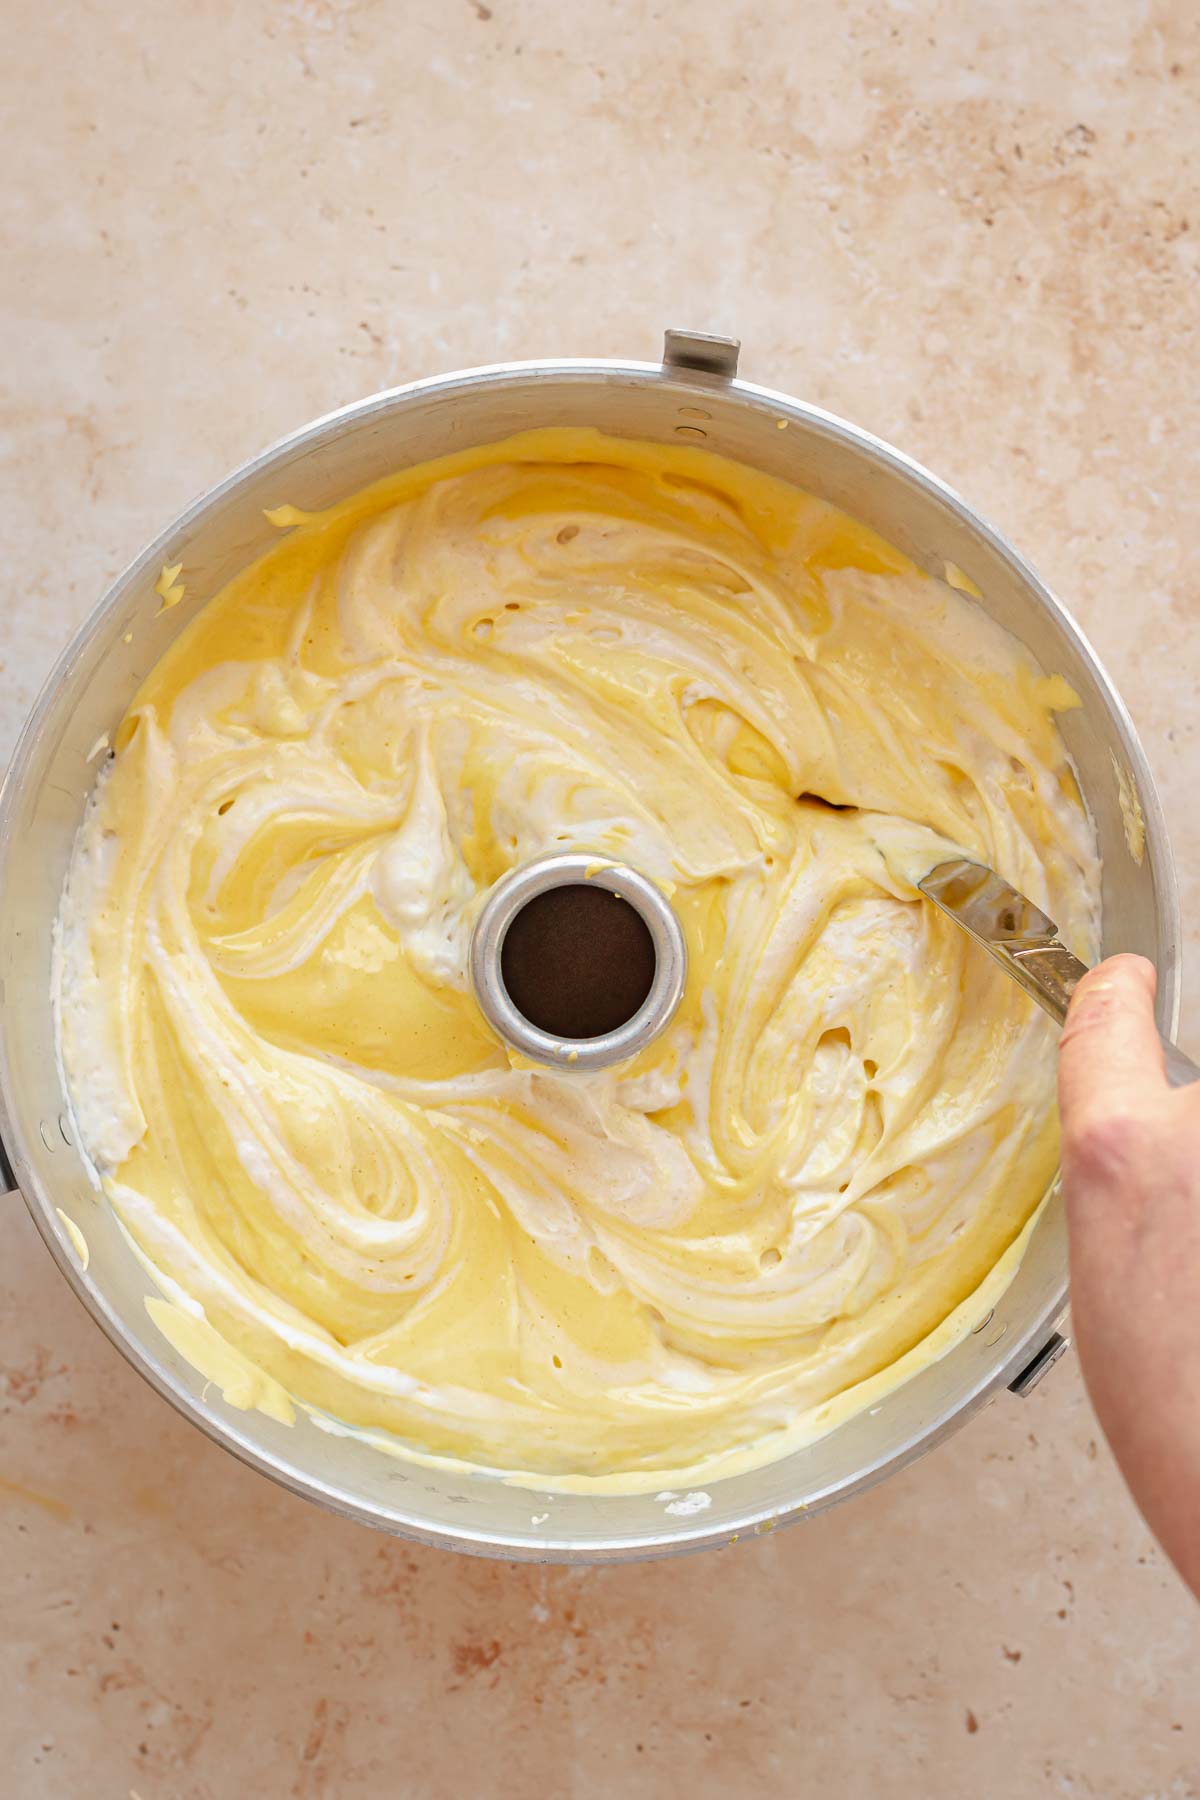 A knife swirls together the batters in the tube pan.